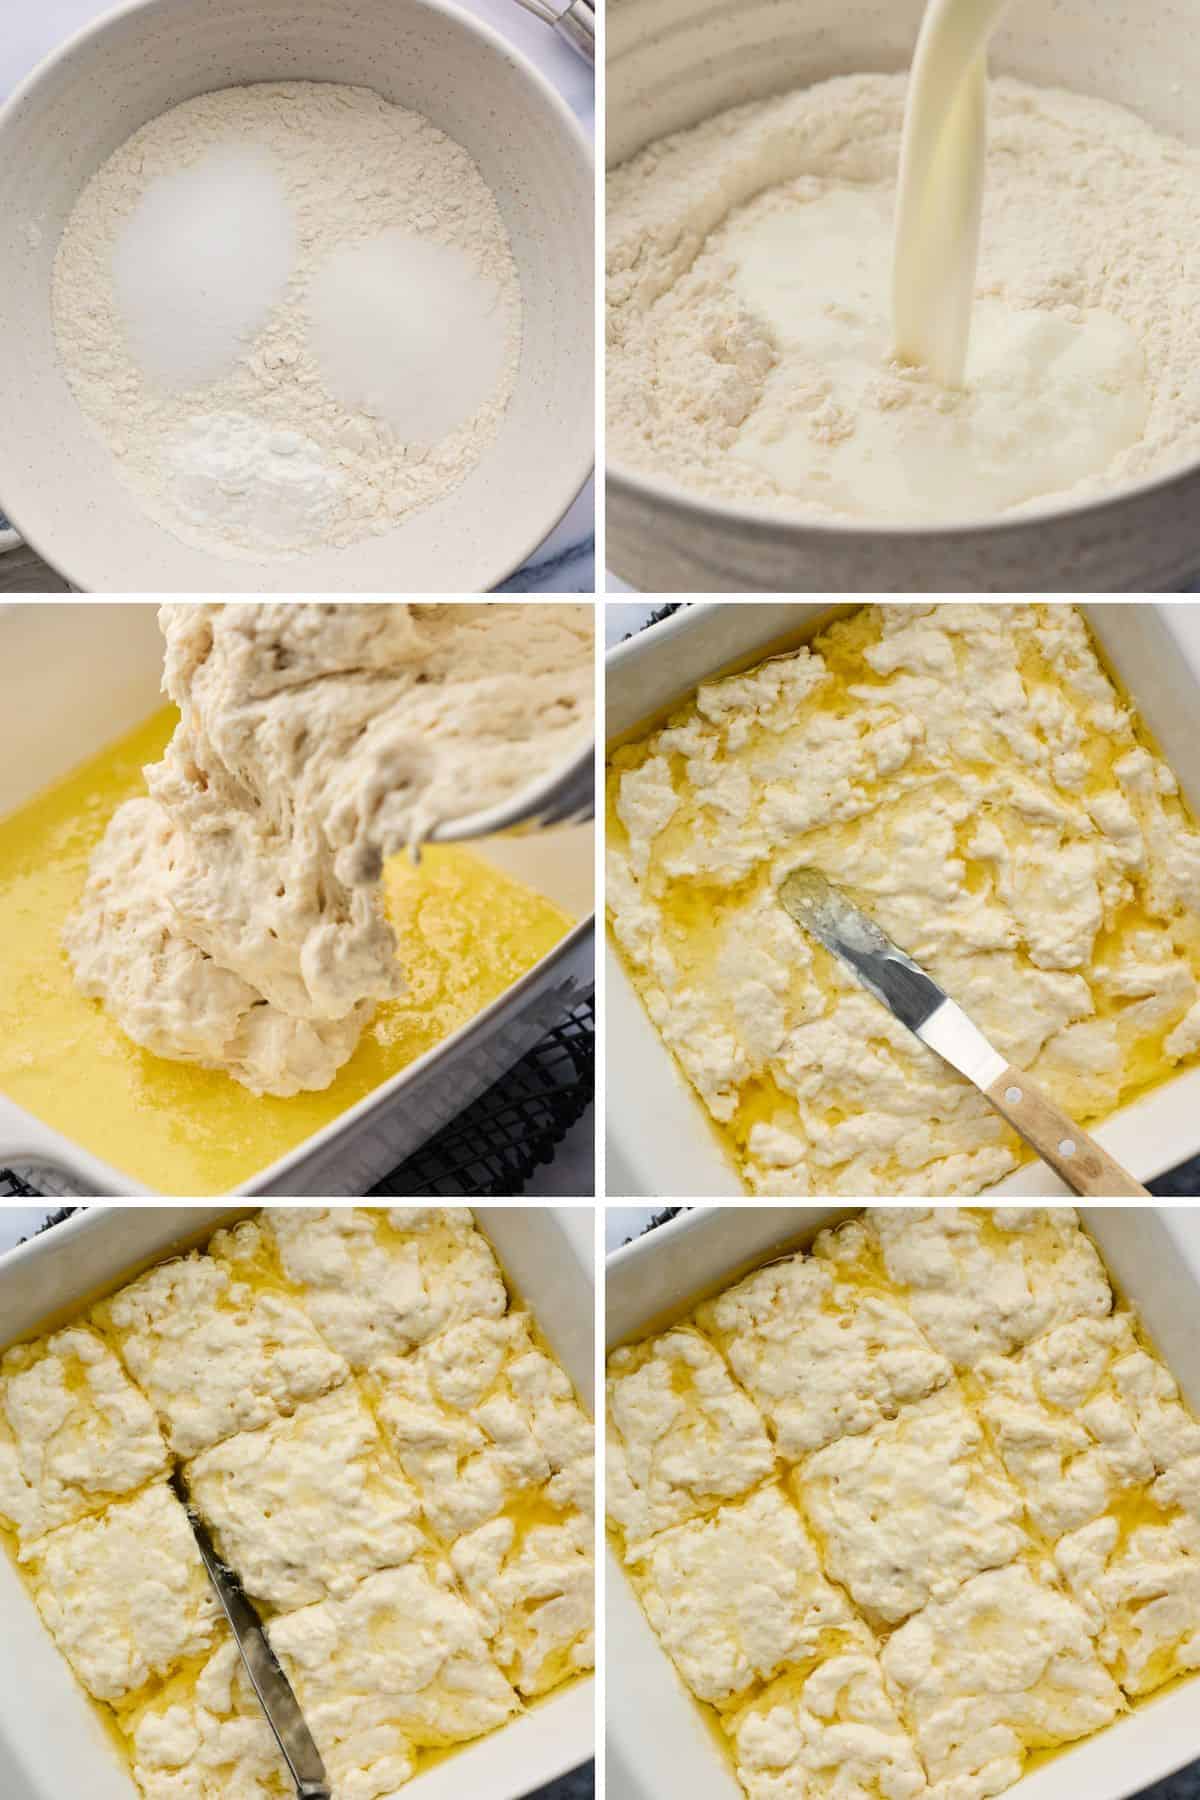 Steps of creating a biscuit batter and adding to a baking dish swimming in melted butter.